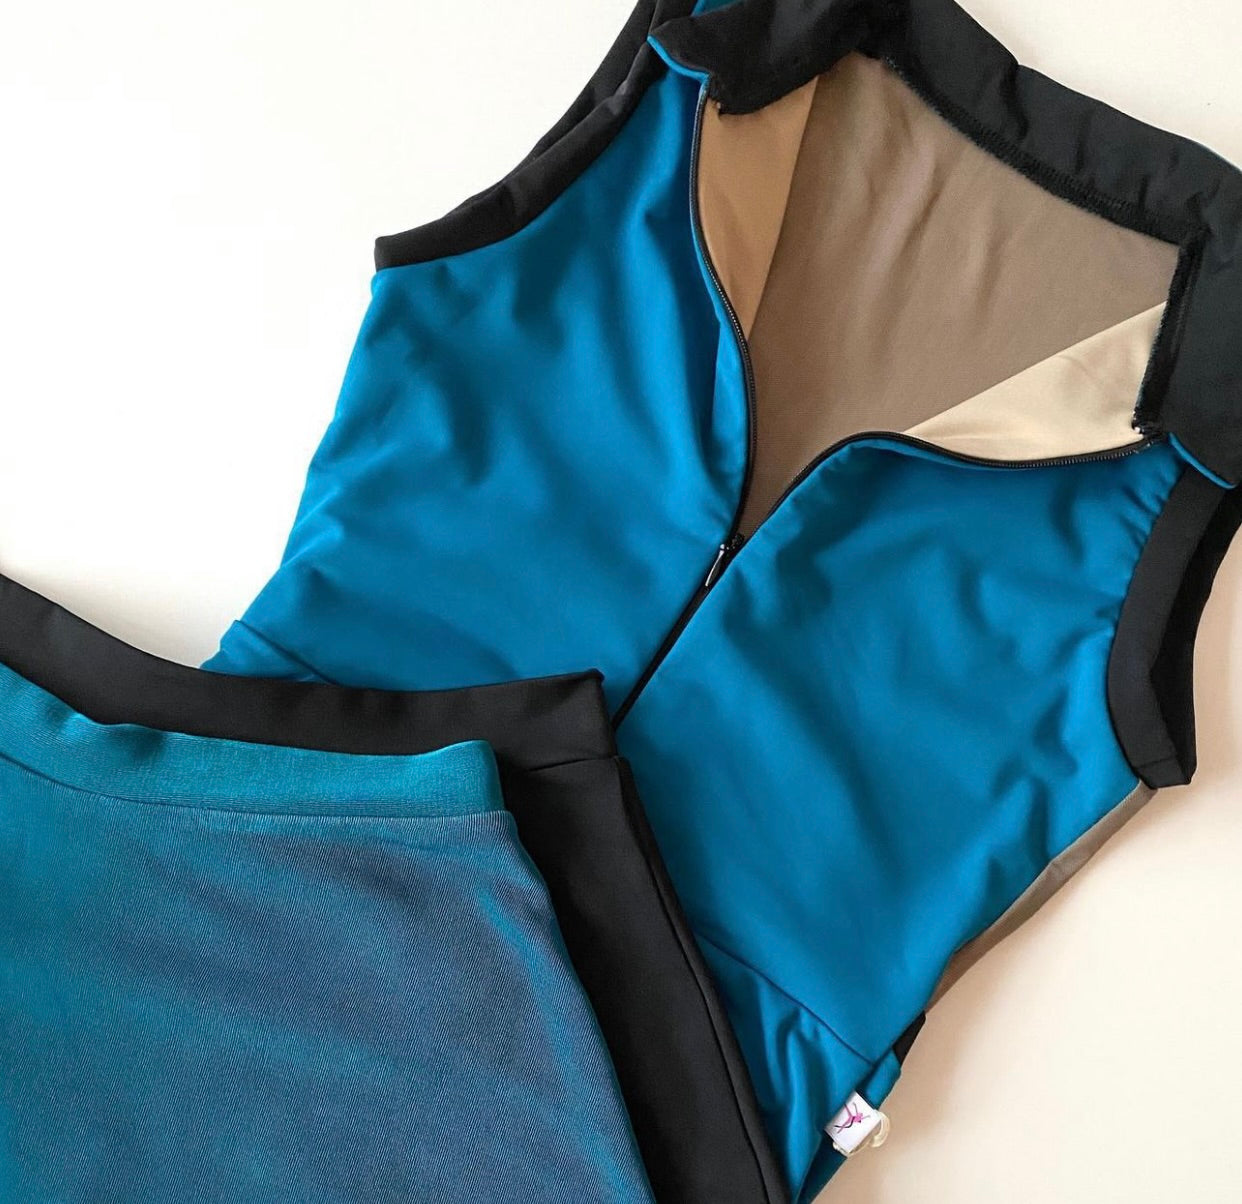 Sole Dancewear dance leotard zip up in Petrolium blue sold by The Collective Dancewear with bullet pointe skirts